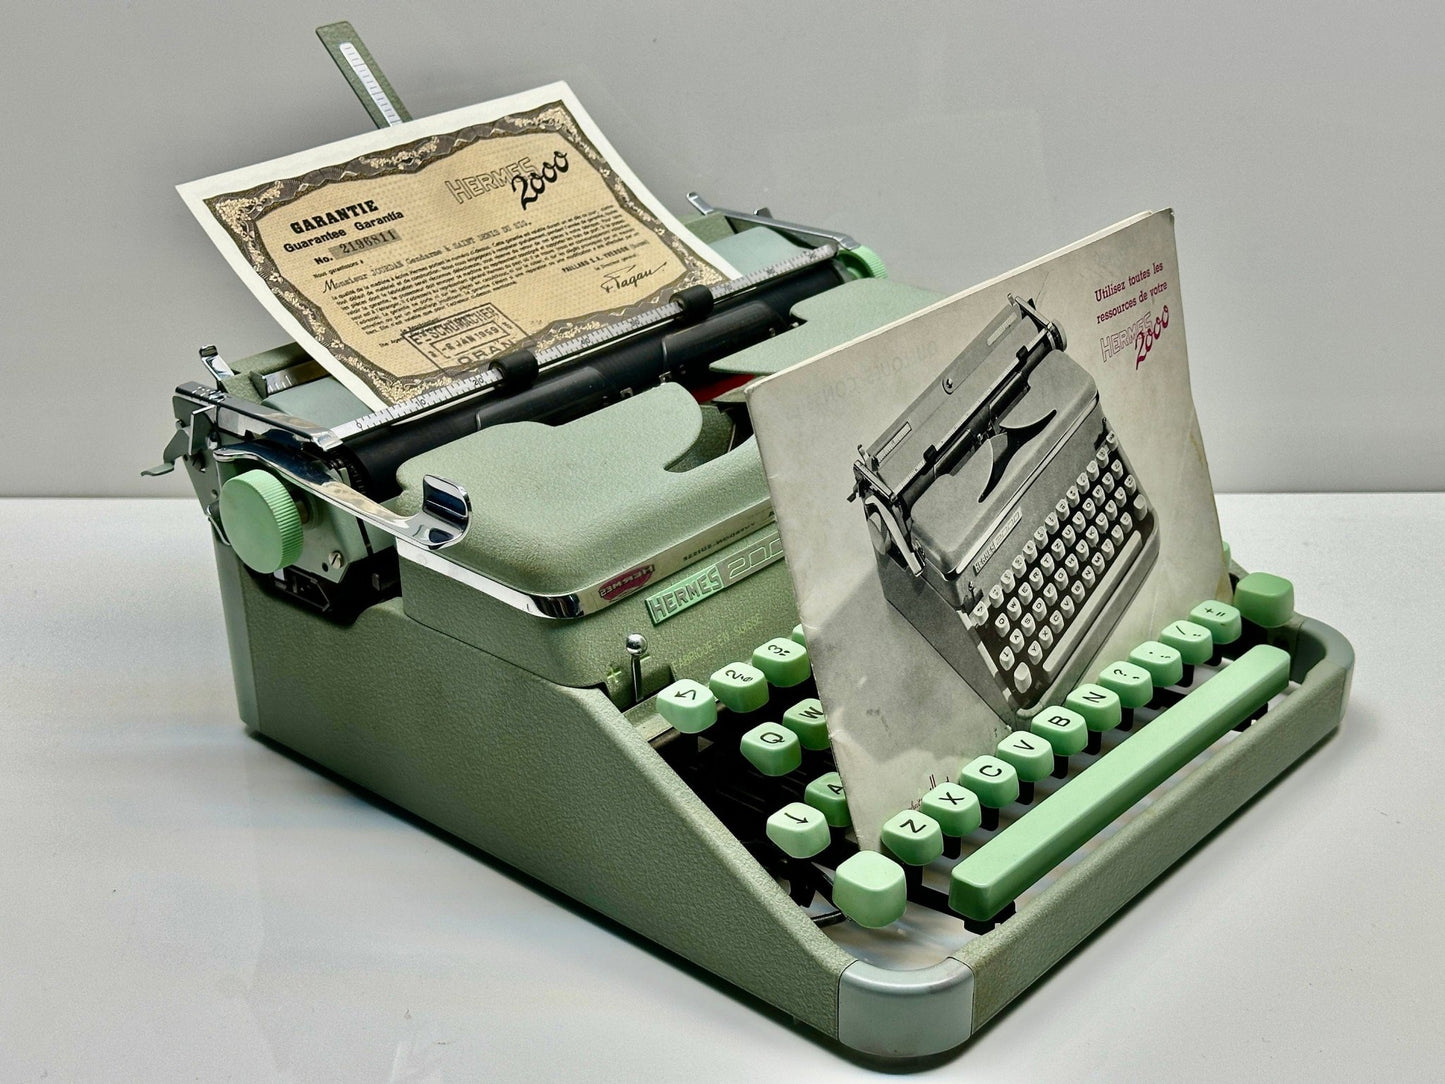 Hermes 2000 Green Typewriter - A Special and Best Gift, Superior Craftsmanship, Green Keyboard, Warranty Included